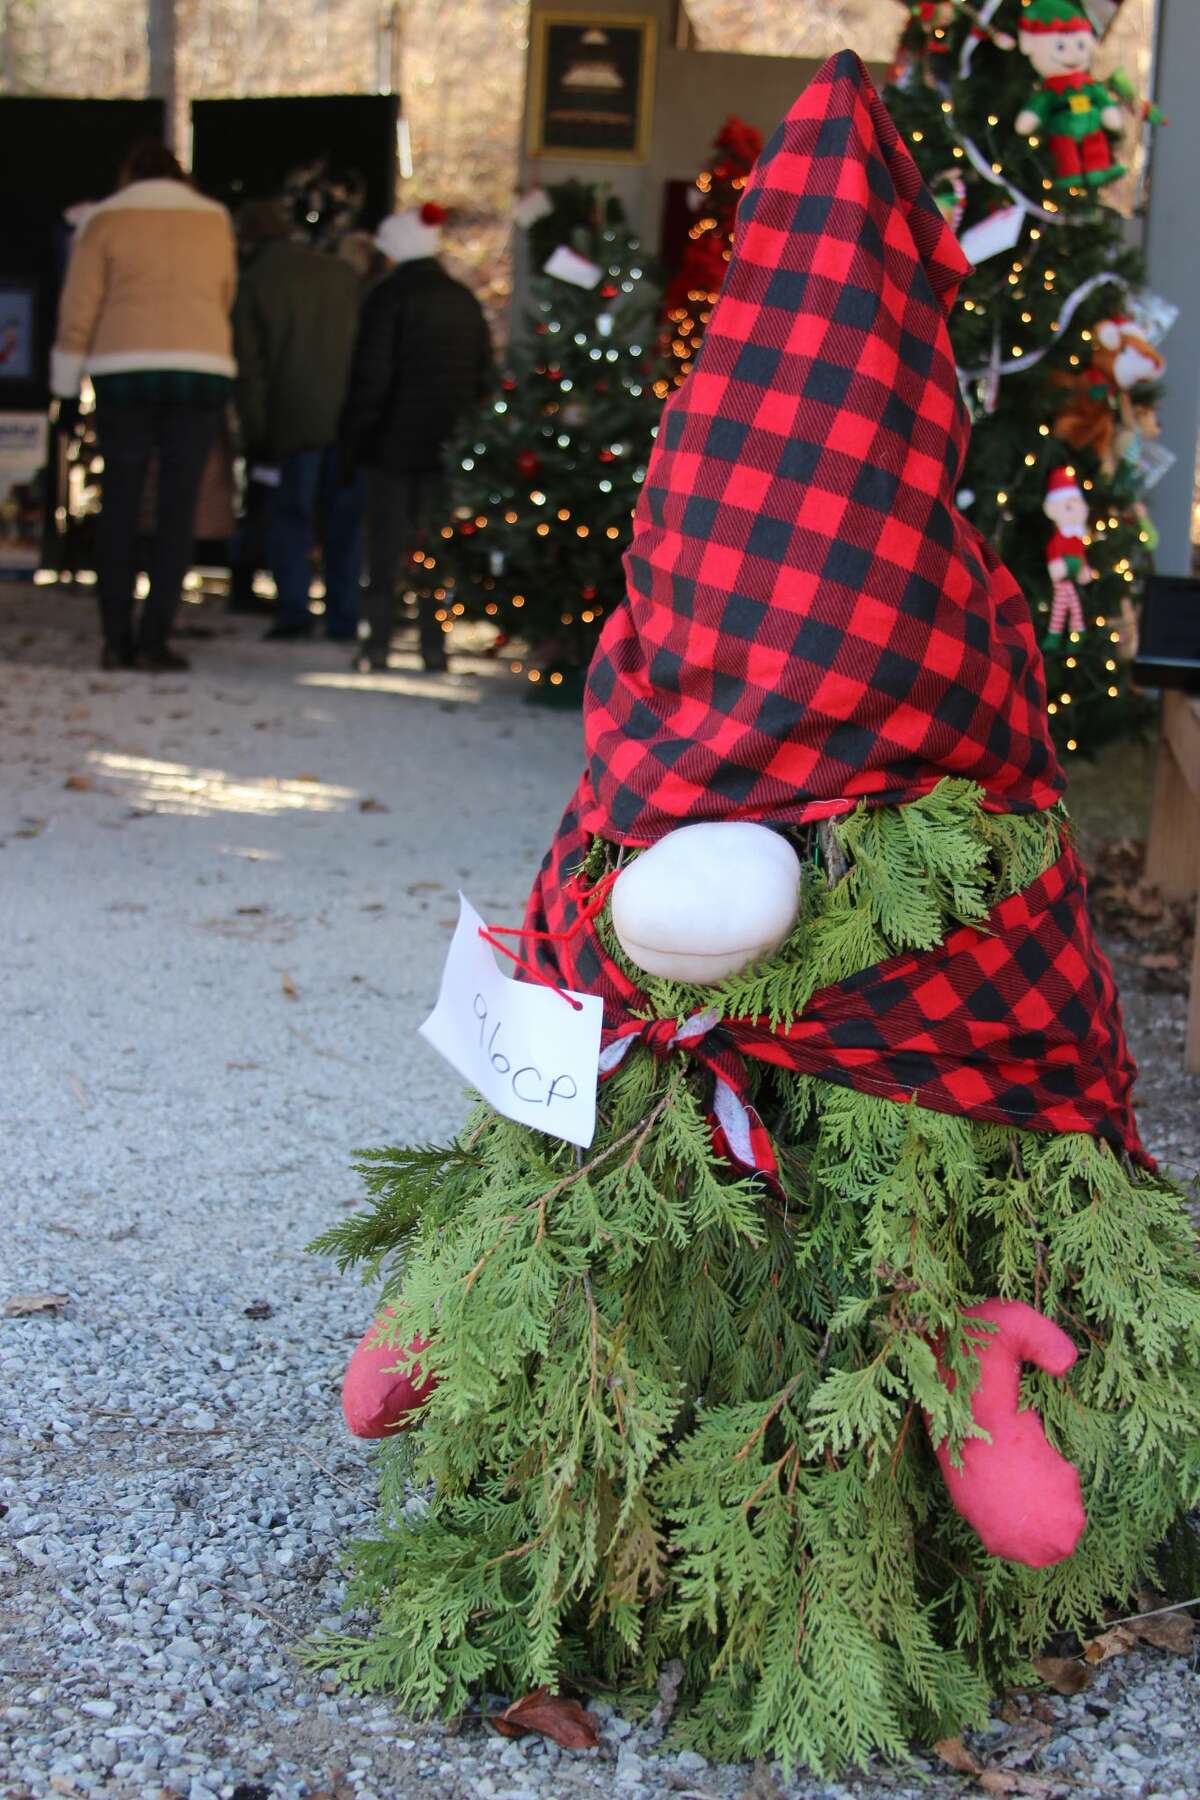 The Festival of Trees, held on  Thanksgiving weekend, featured a variety of decorated trees and wreaths.